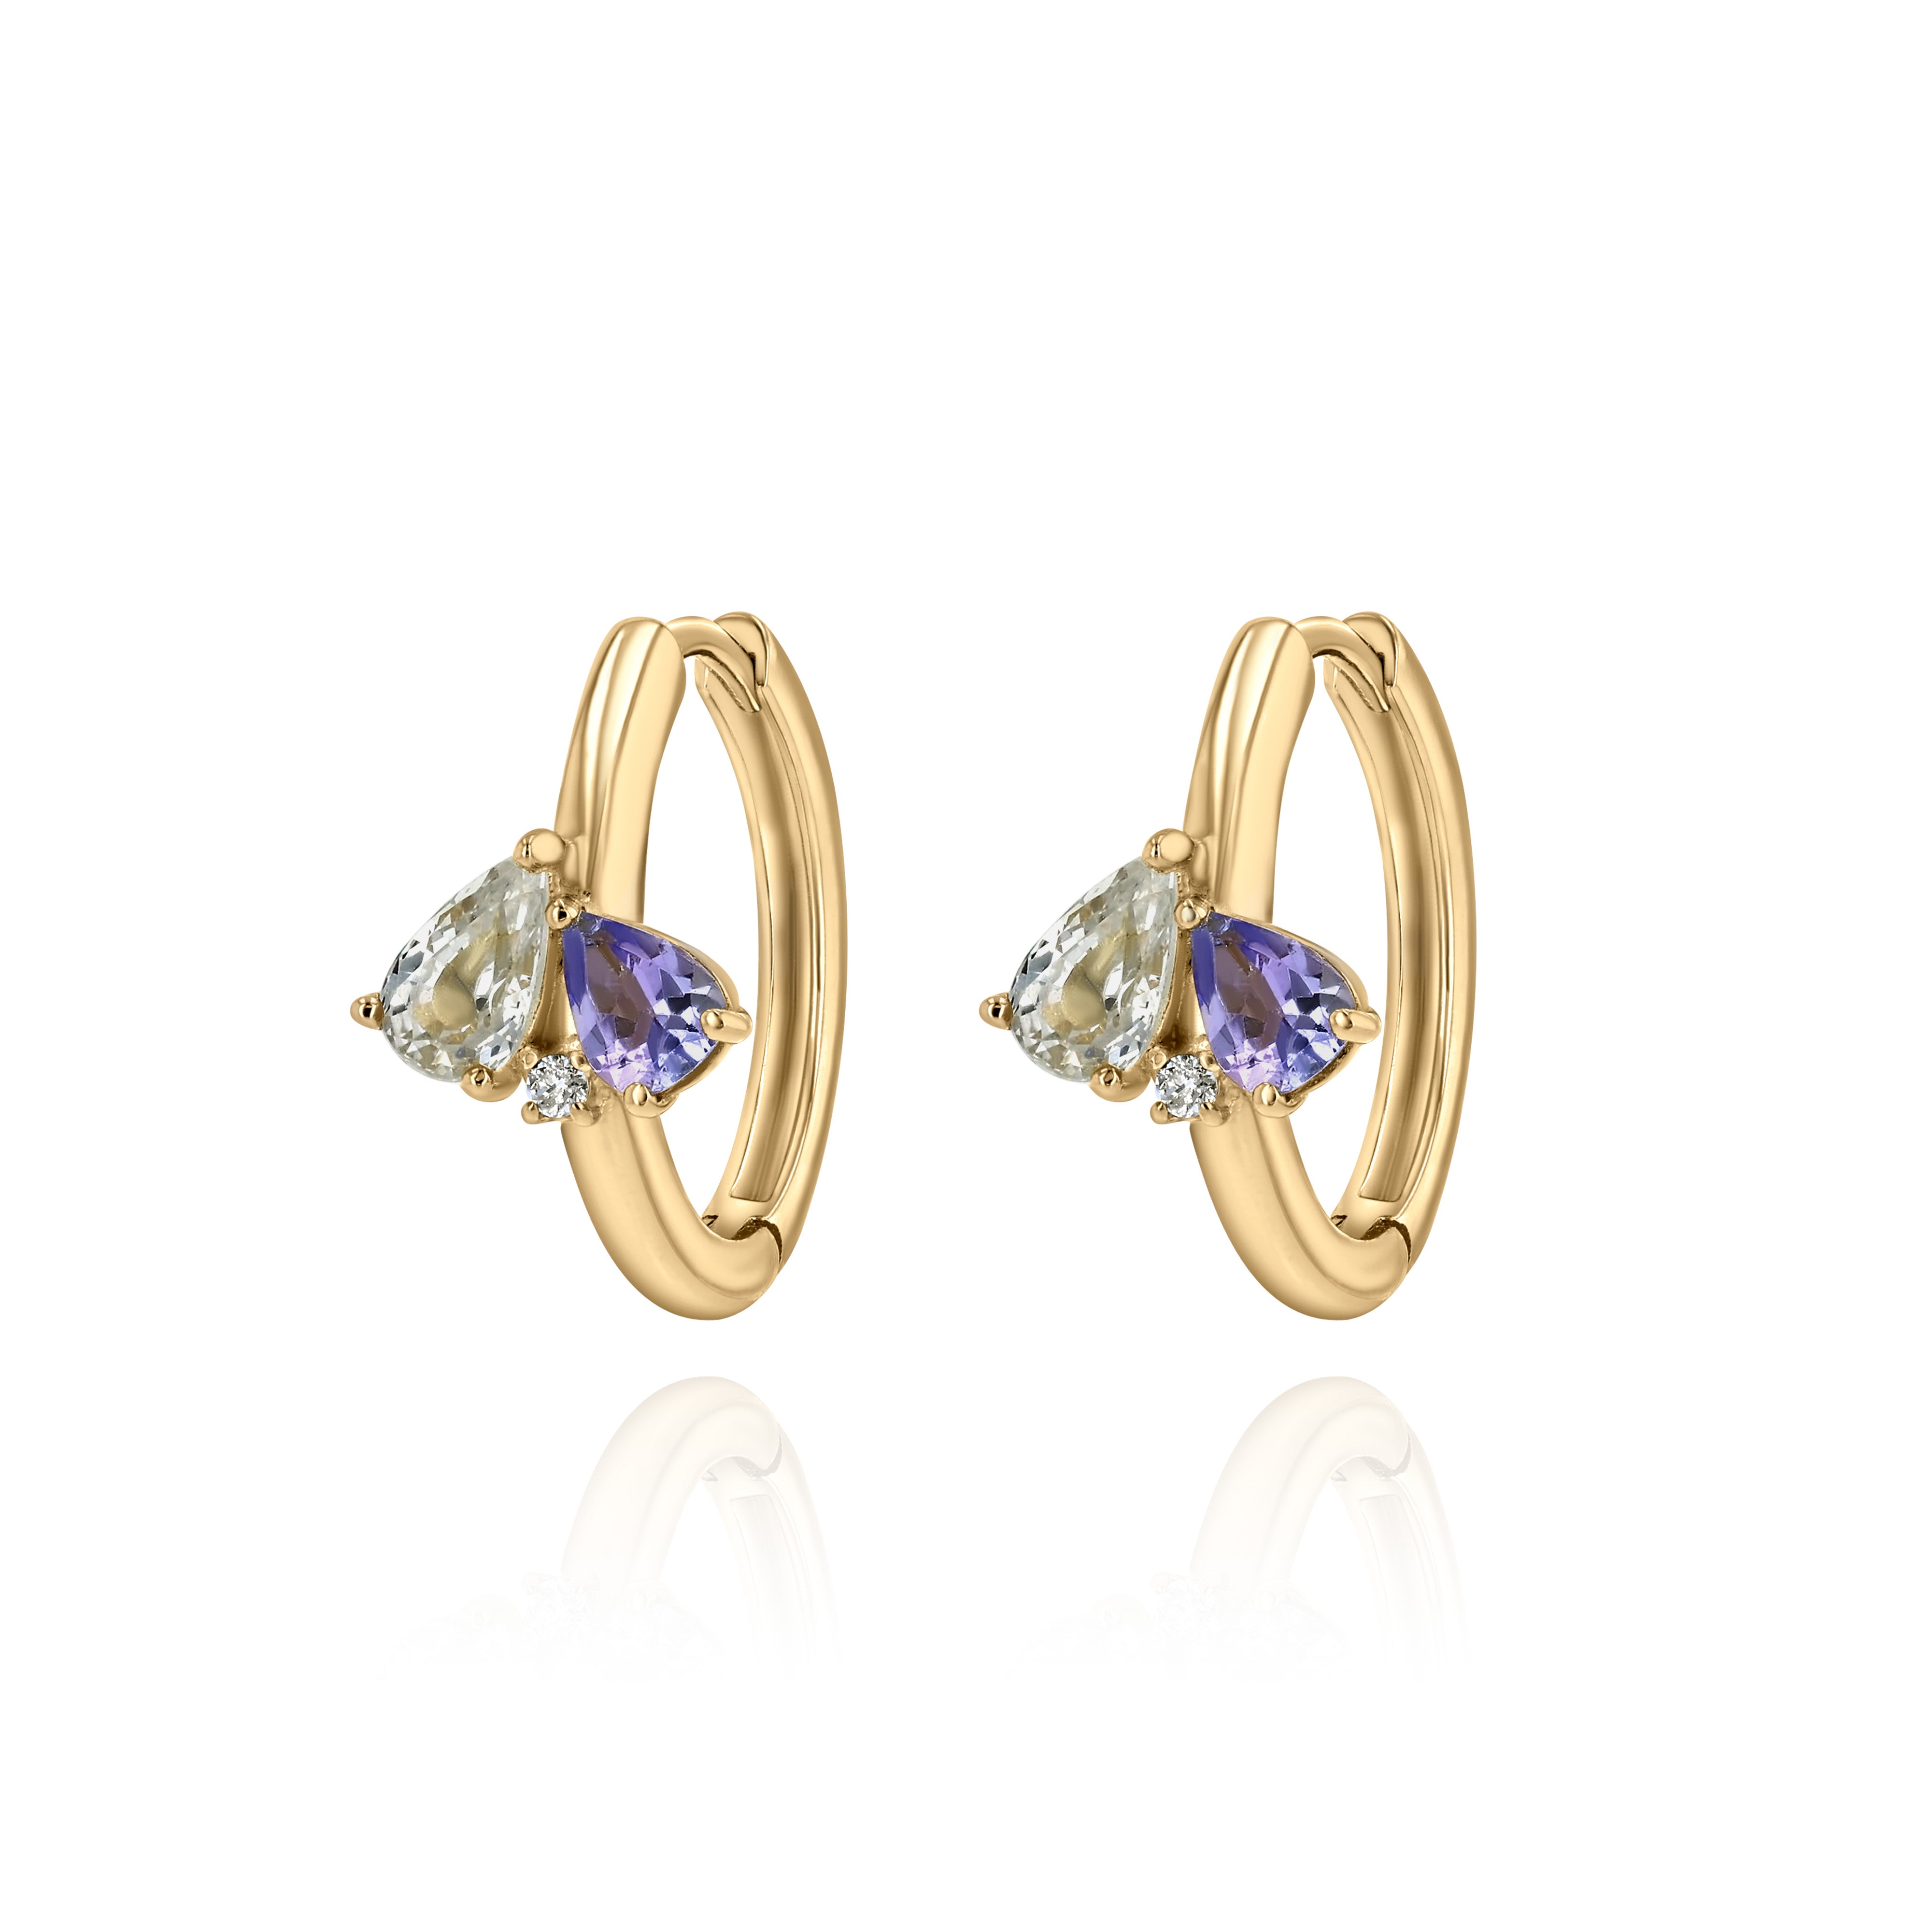 Yellow Gold hoop Earrings with Tanzanite and White Sapphire, and a small round Diamond, Medium